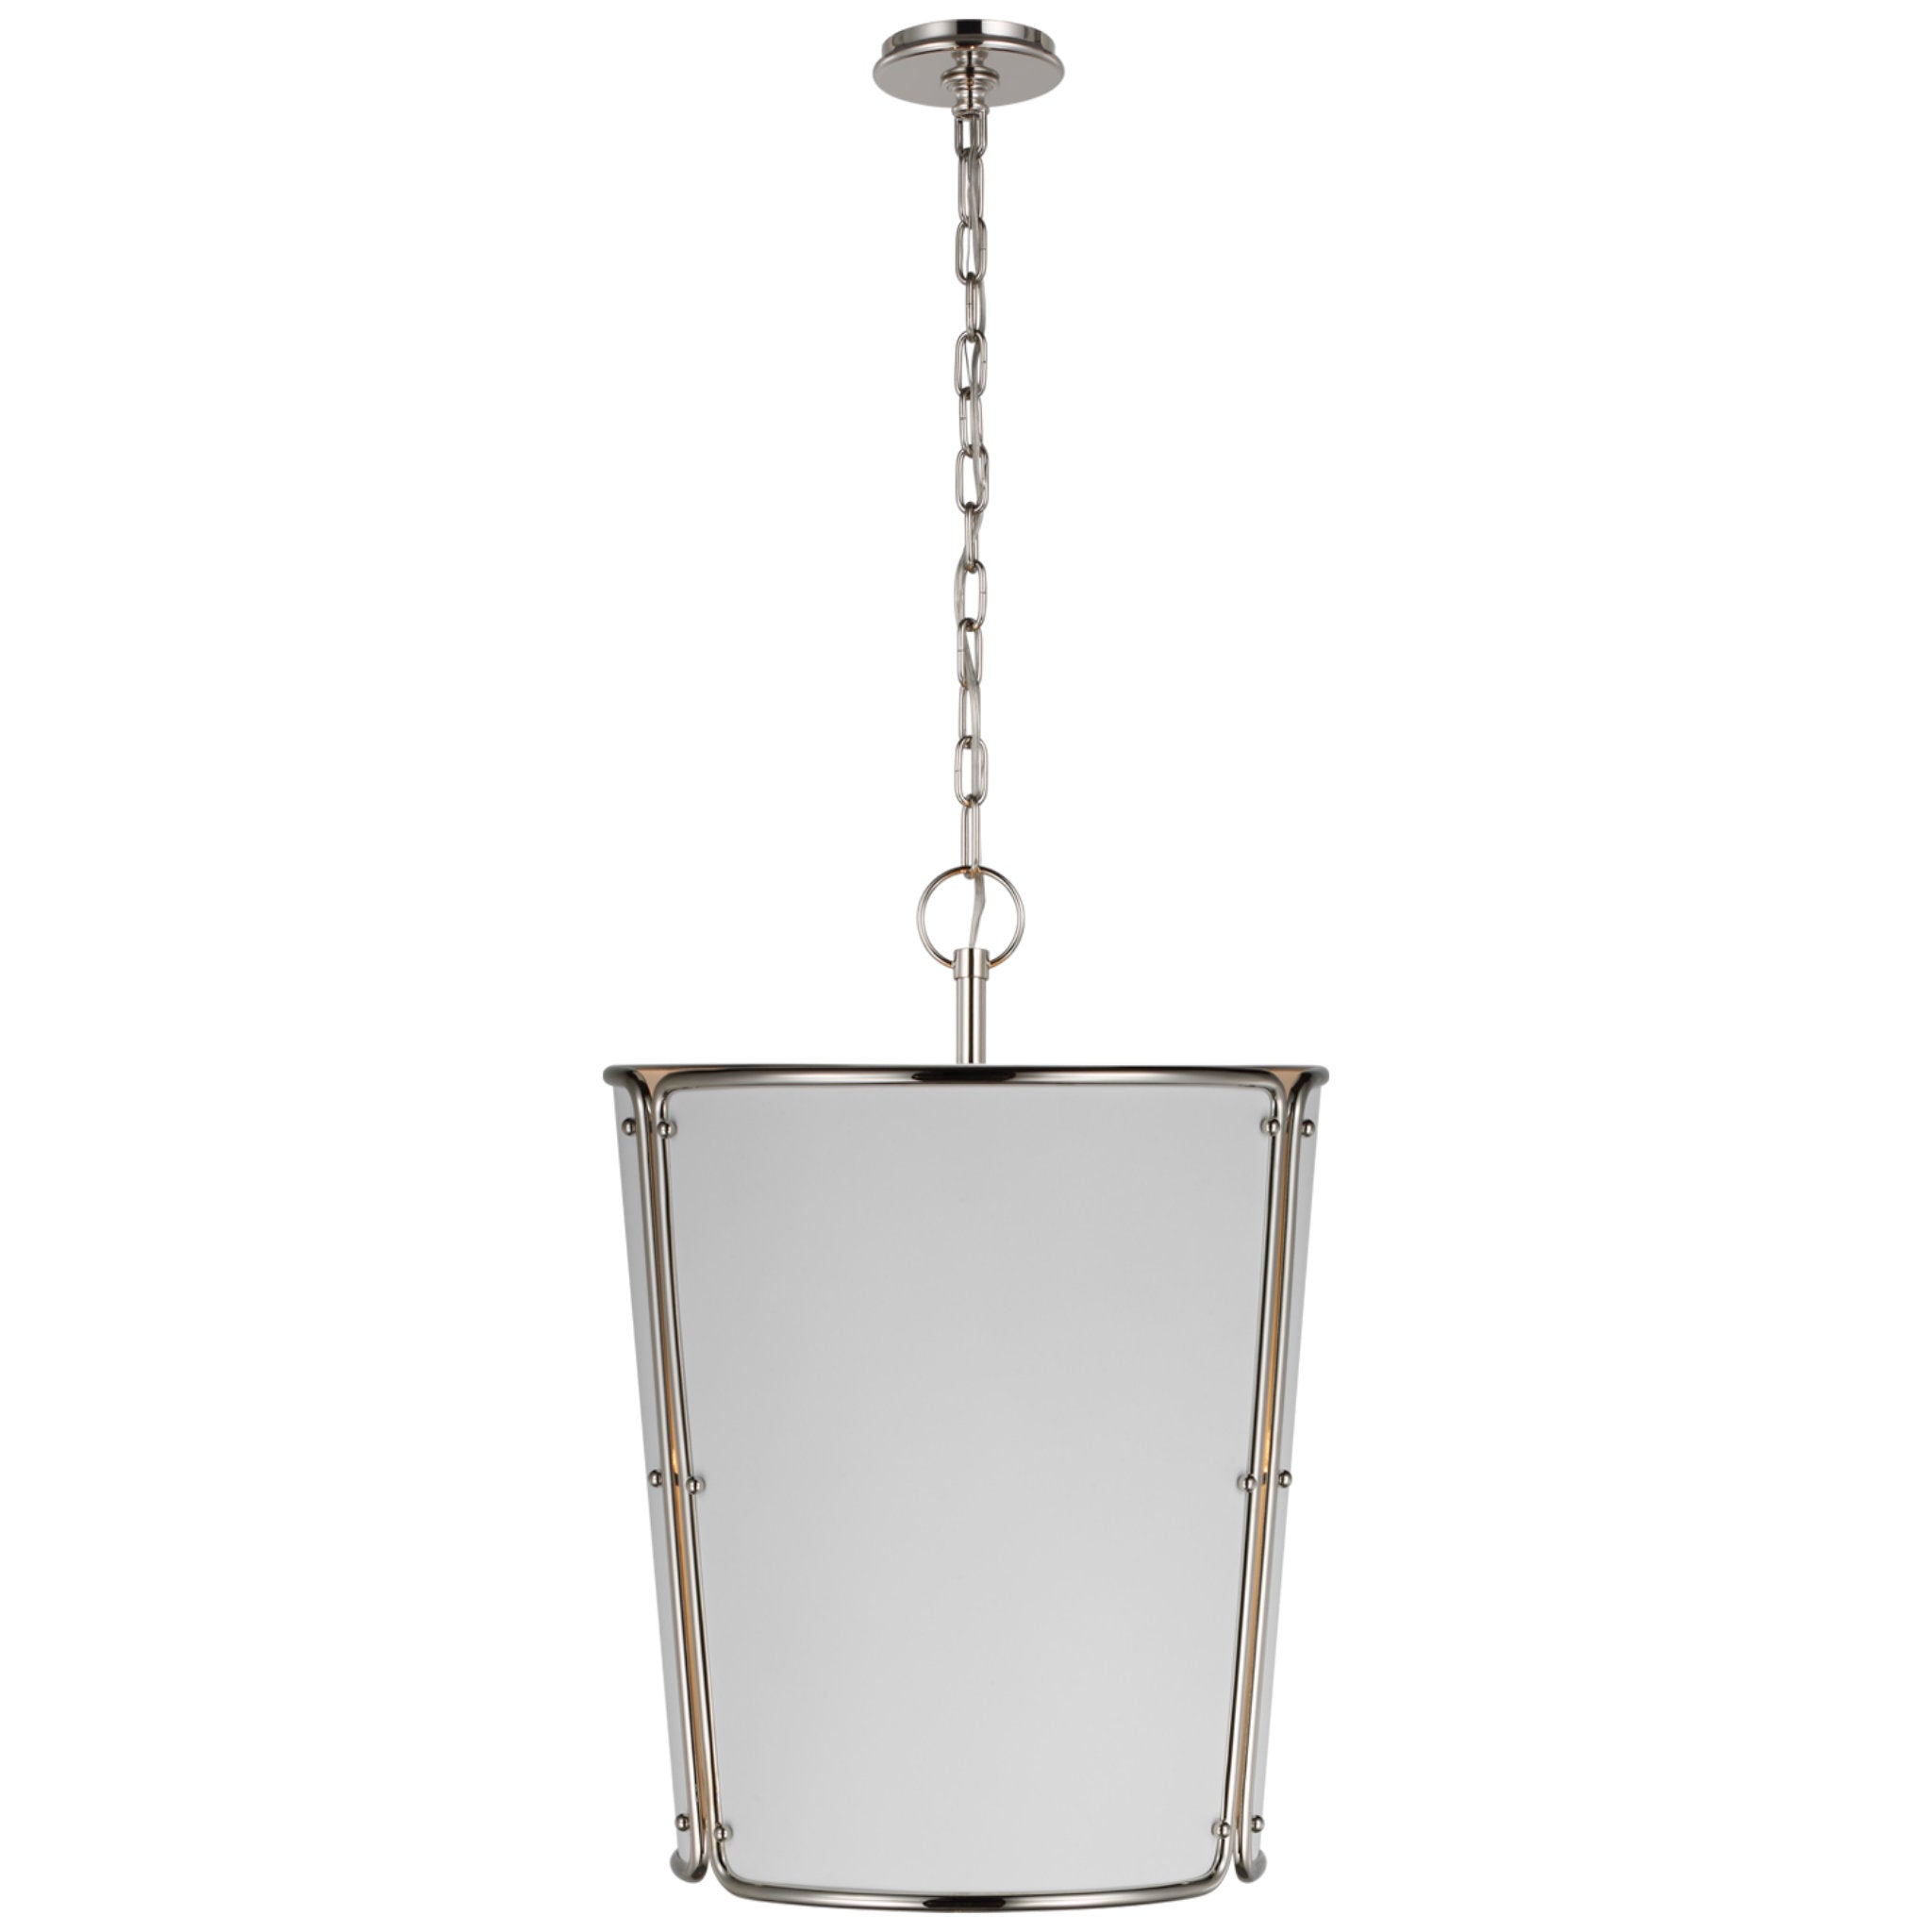 Carrier and Company Hastings Medium Pendant in Polished Nickel with White Shade